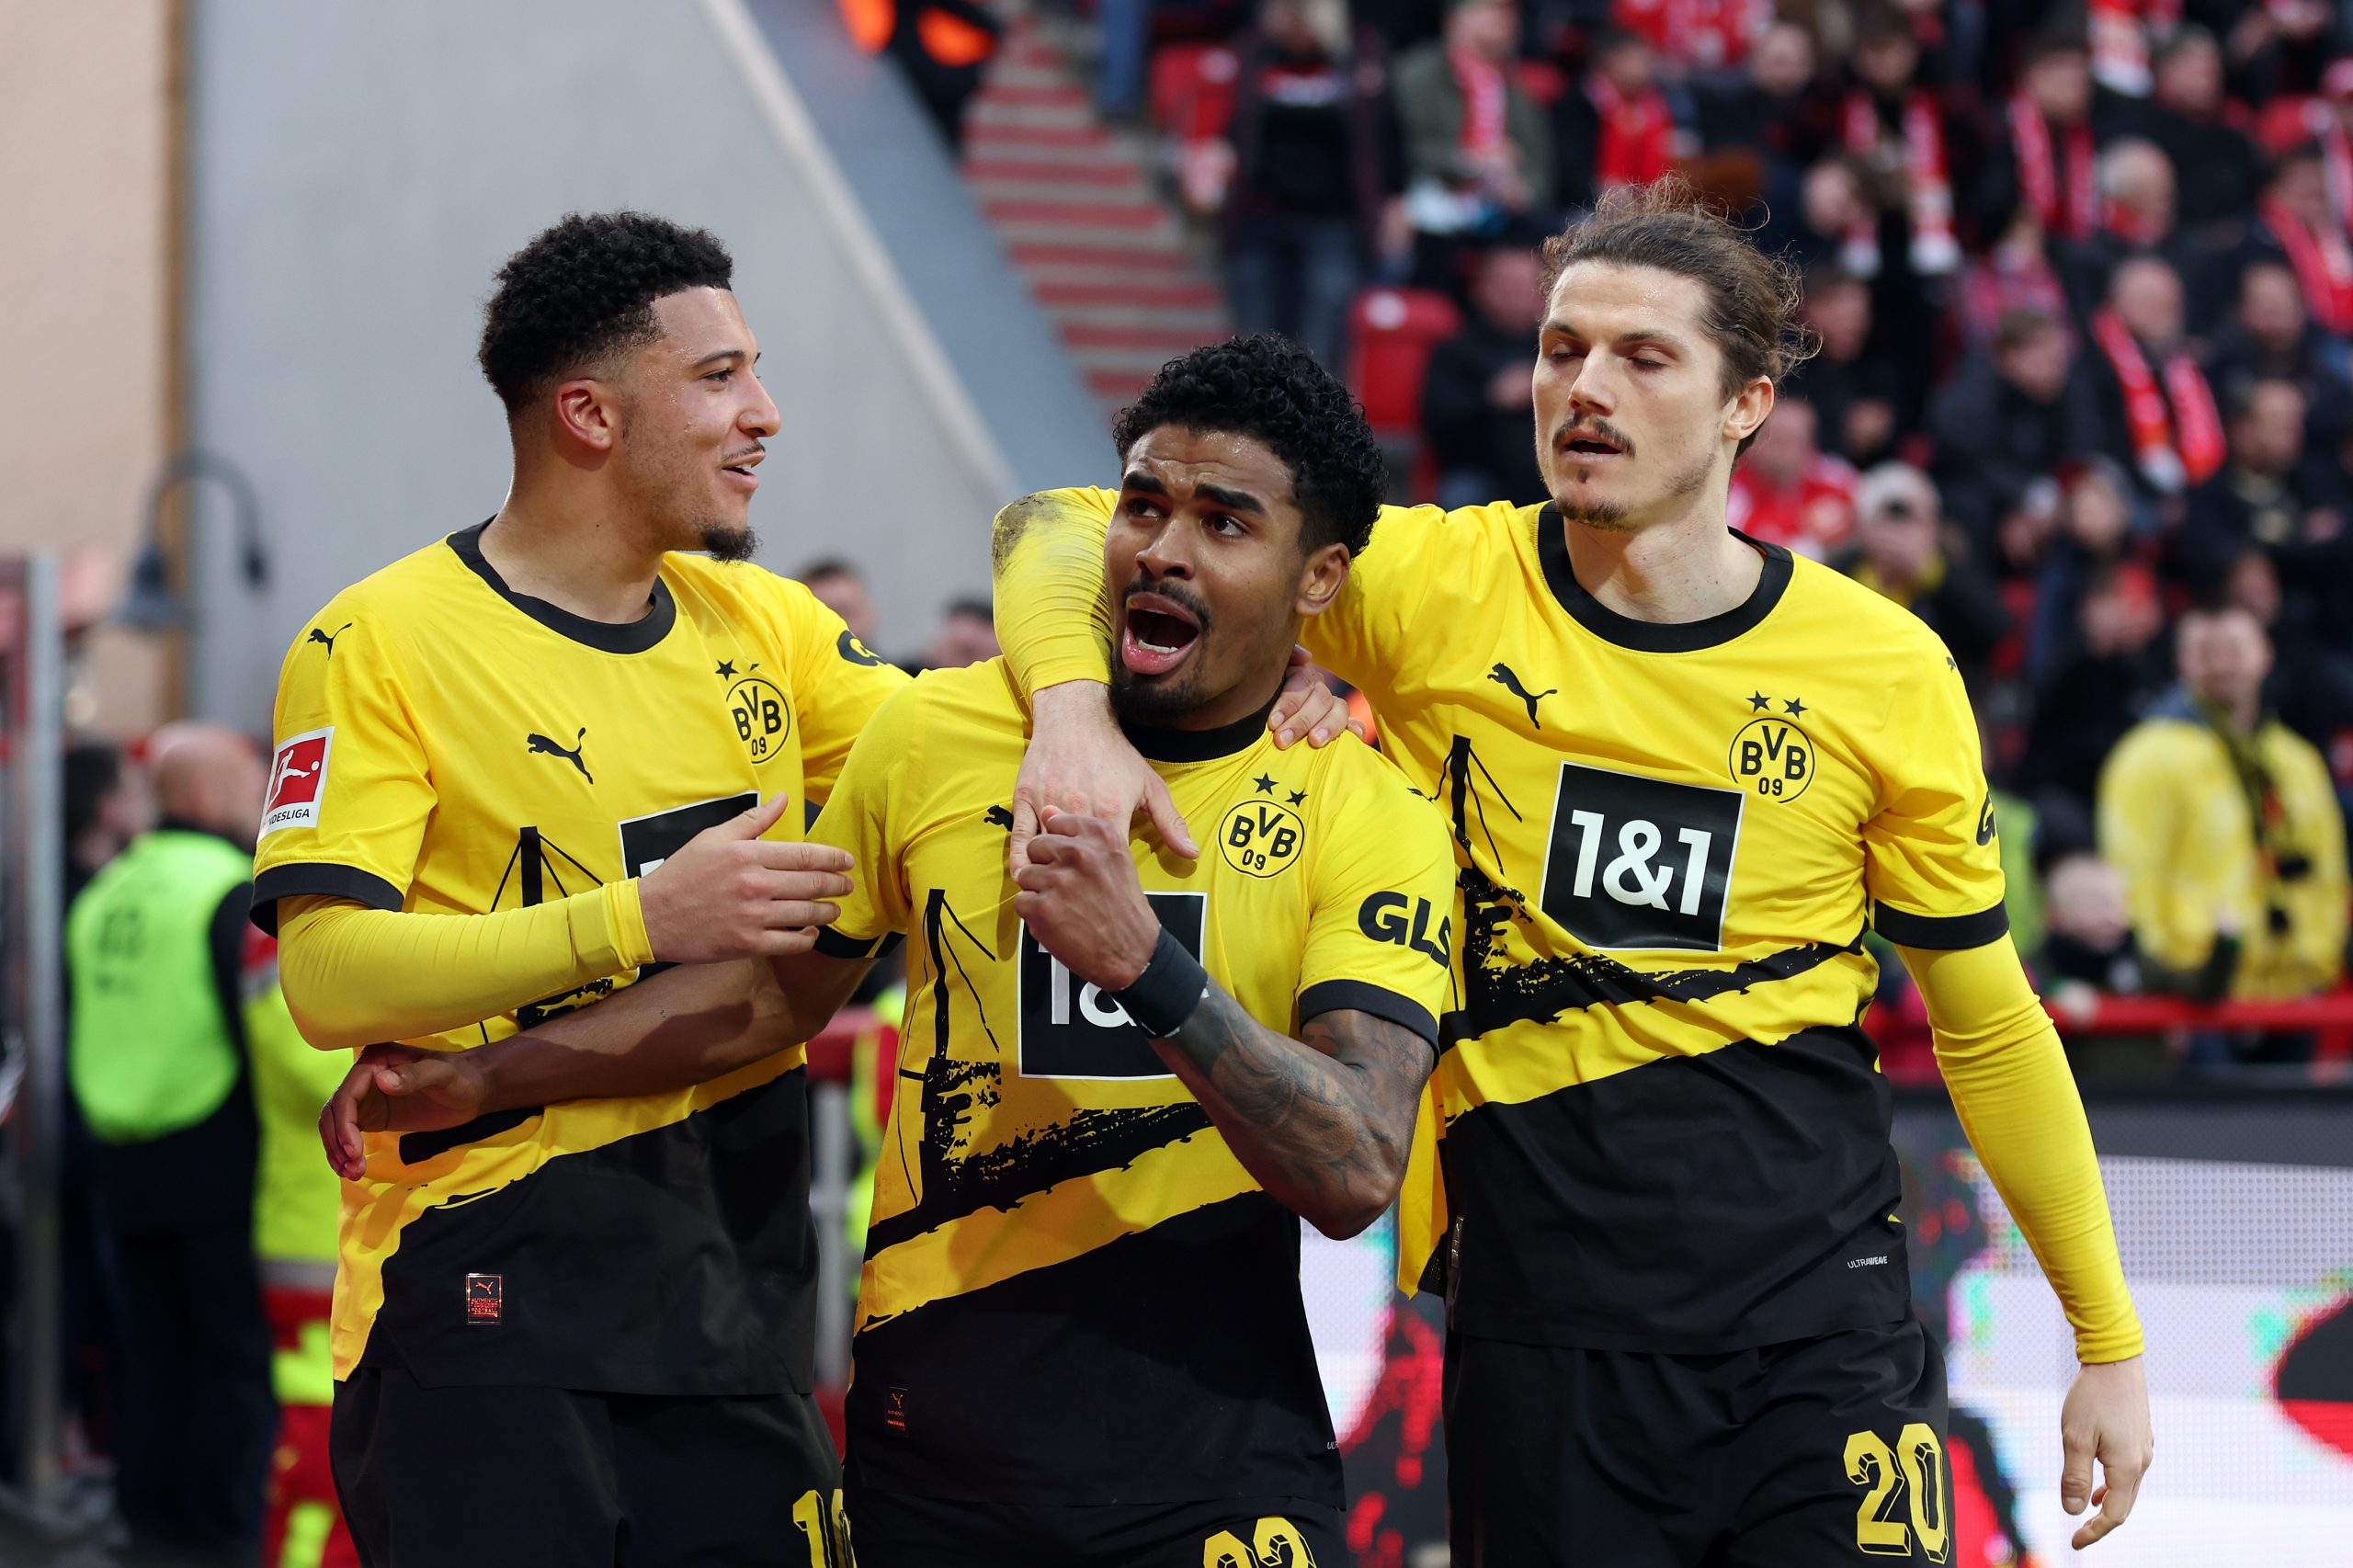 Ian Maatsen and Manchester United loanee Jadon Sancho shine as Dortmund knock out Atlético Madrid to reach UCL semi-finals.